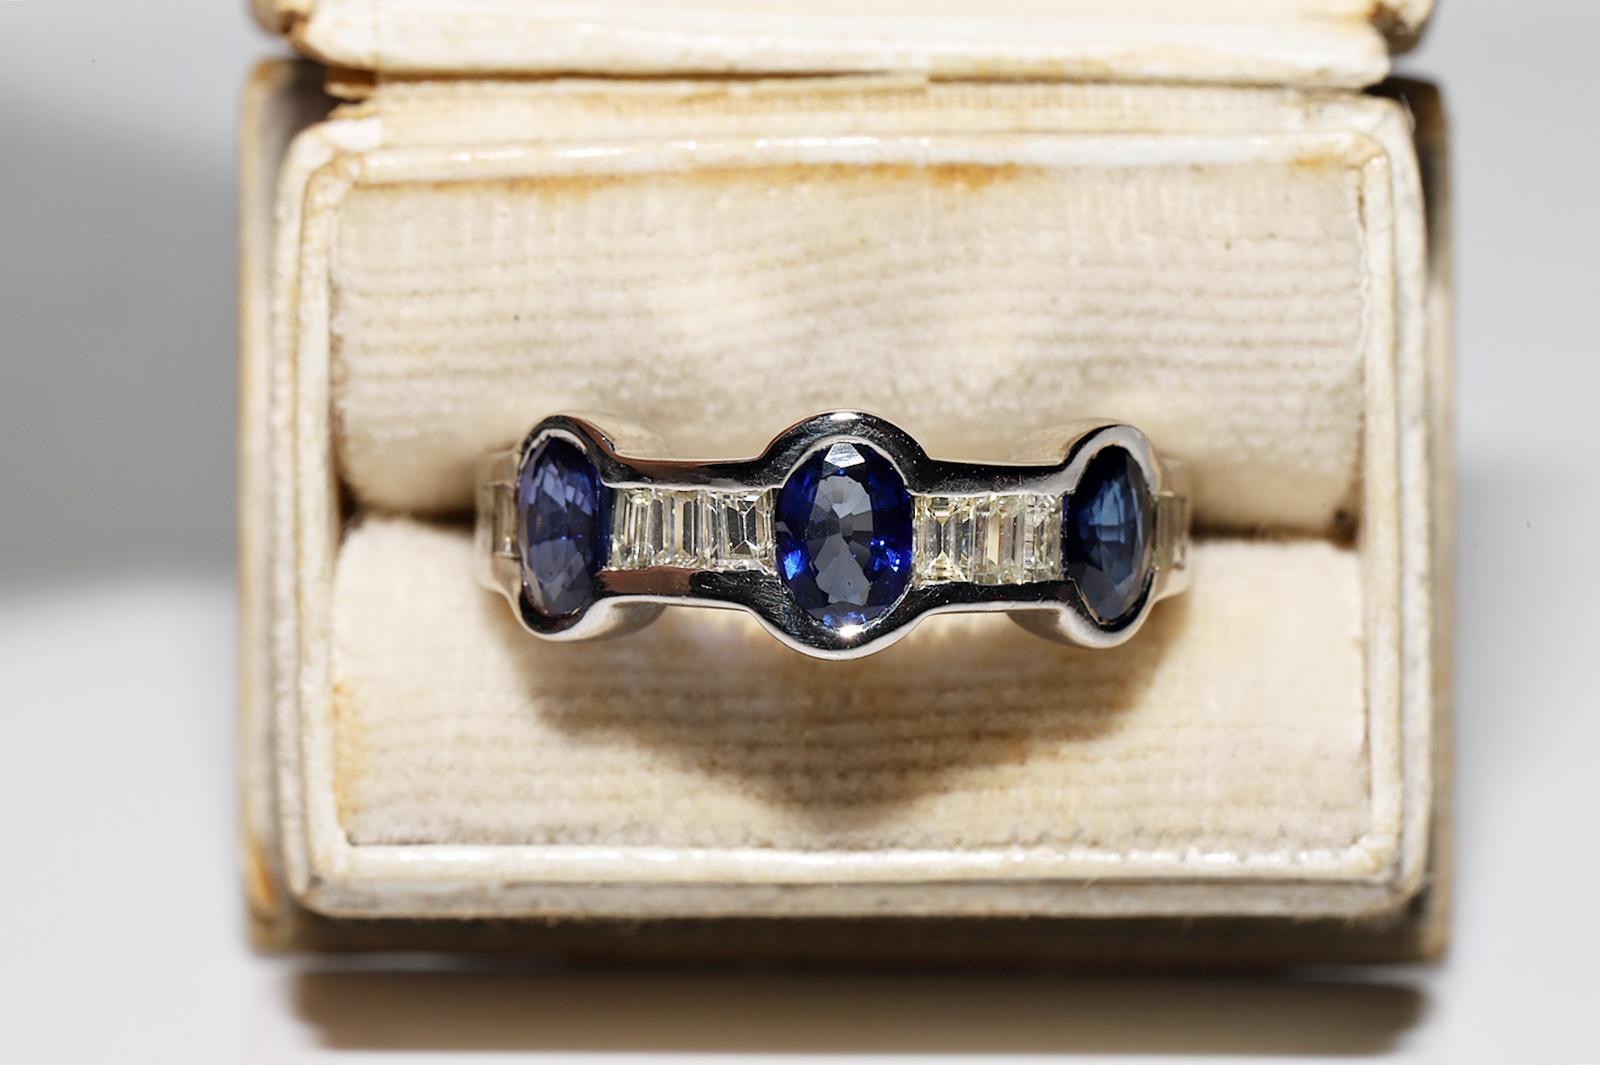 Vintage 18k Gold Natural Baguette Cut Diamond And Sapphire Decorated Ring  In Good Condition For Sale In Fatih/İstanbul, 34